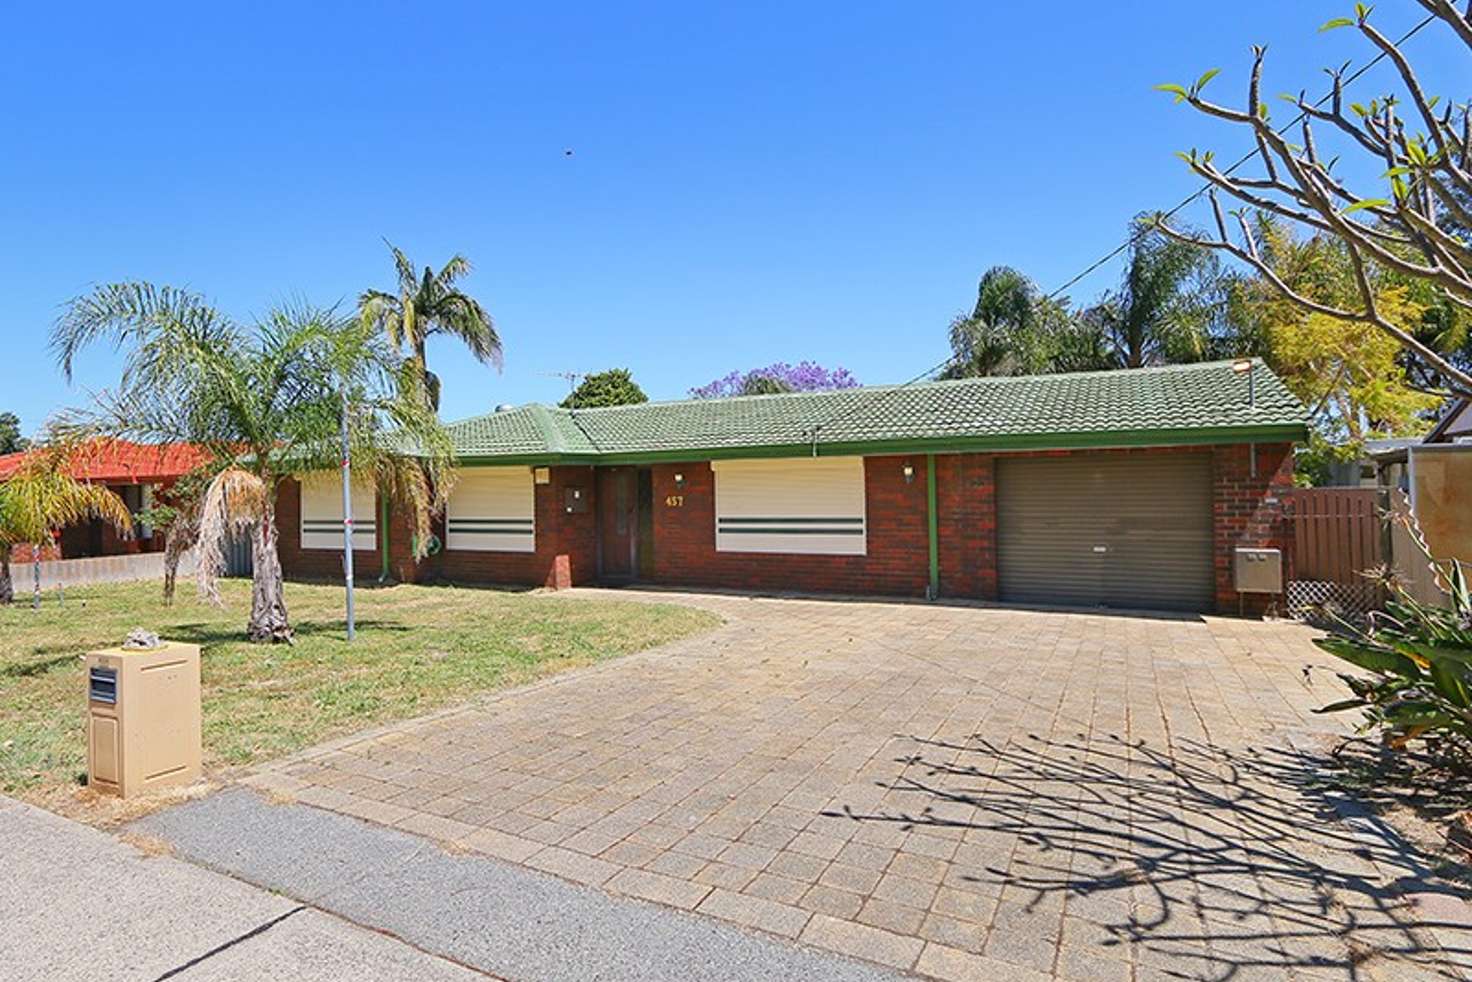 Main view of Homely house listing, 457 Bickley Road, Kenwick WA 6107